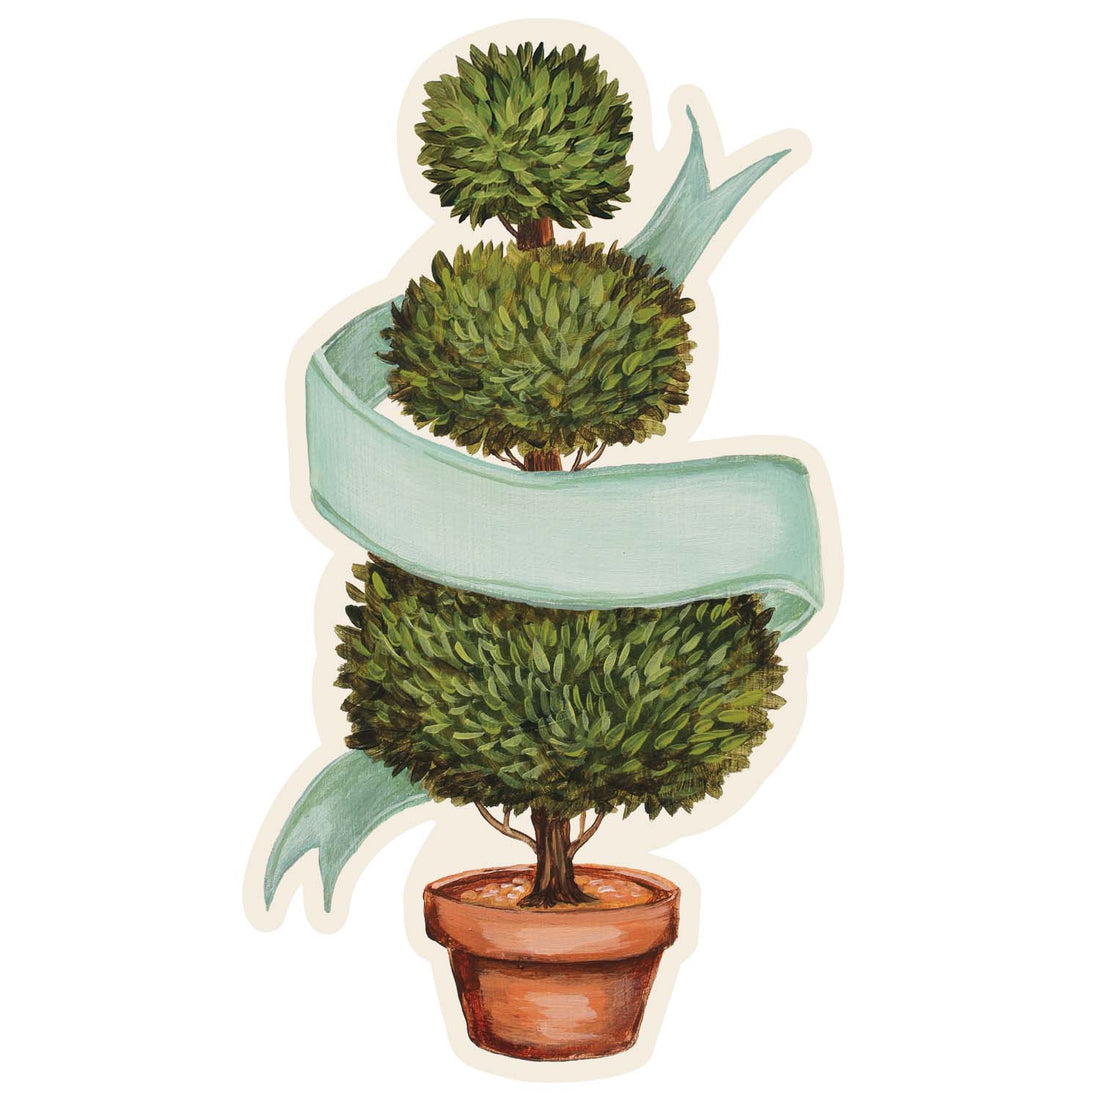 A painting of a Topiary Table Accent by Hester &amp; Cook, perfect as a topiary accent for your table or place cards.